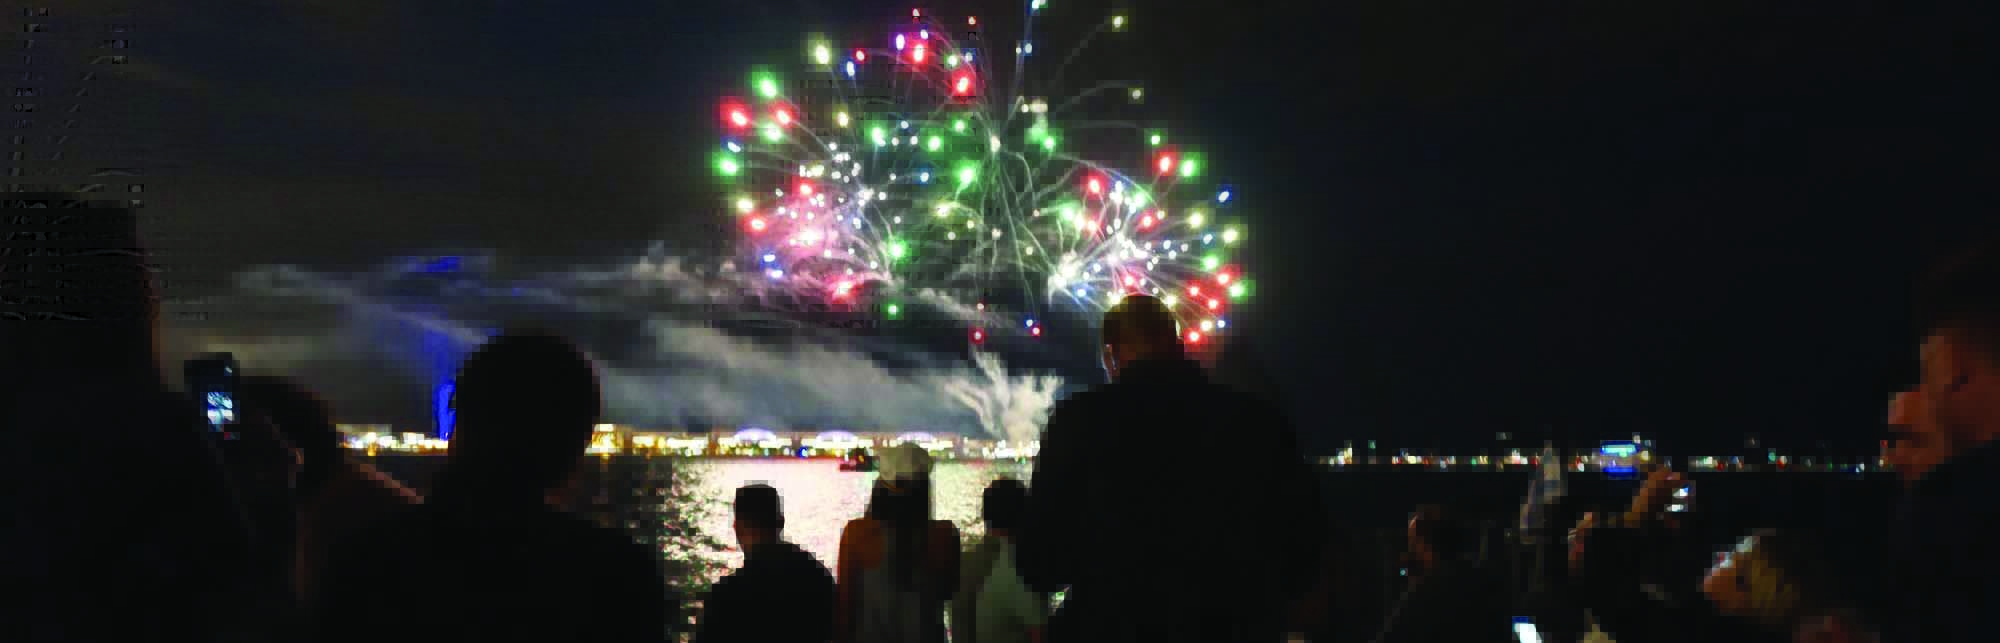 Navy Pier Fireworks pairing at Democratic National Convention| Adelines Sea Moose